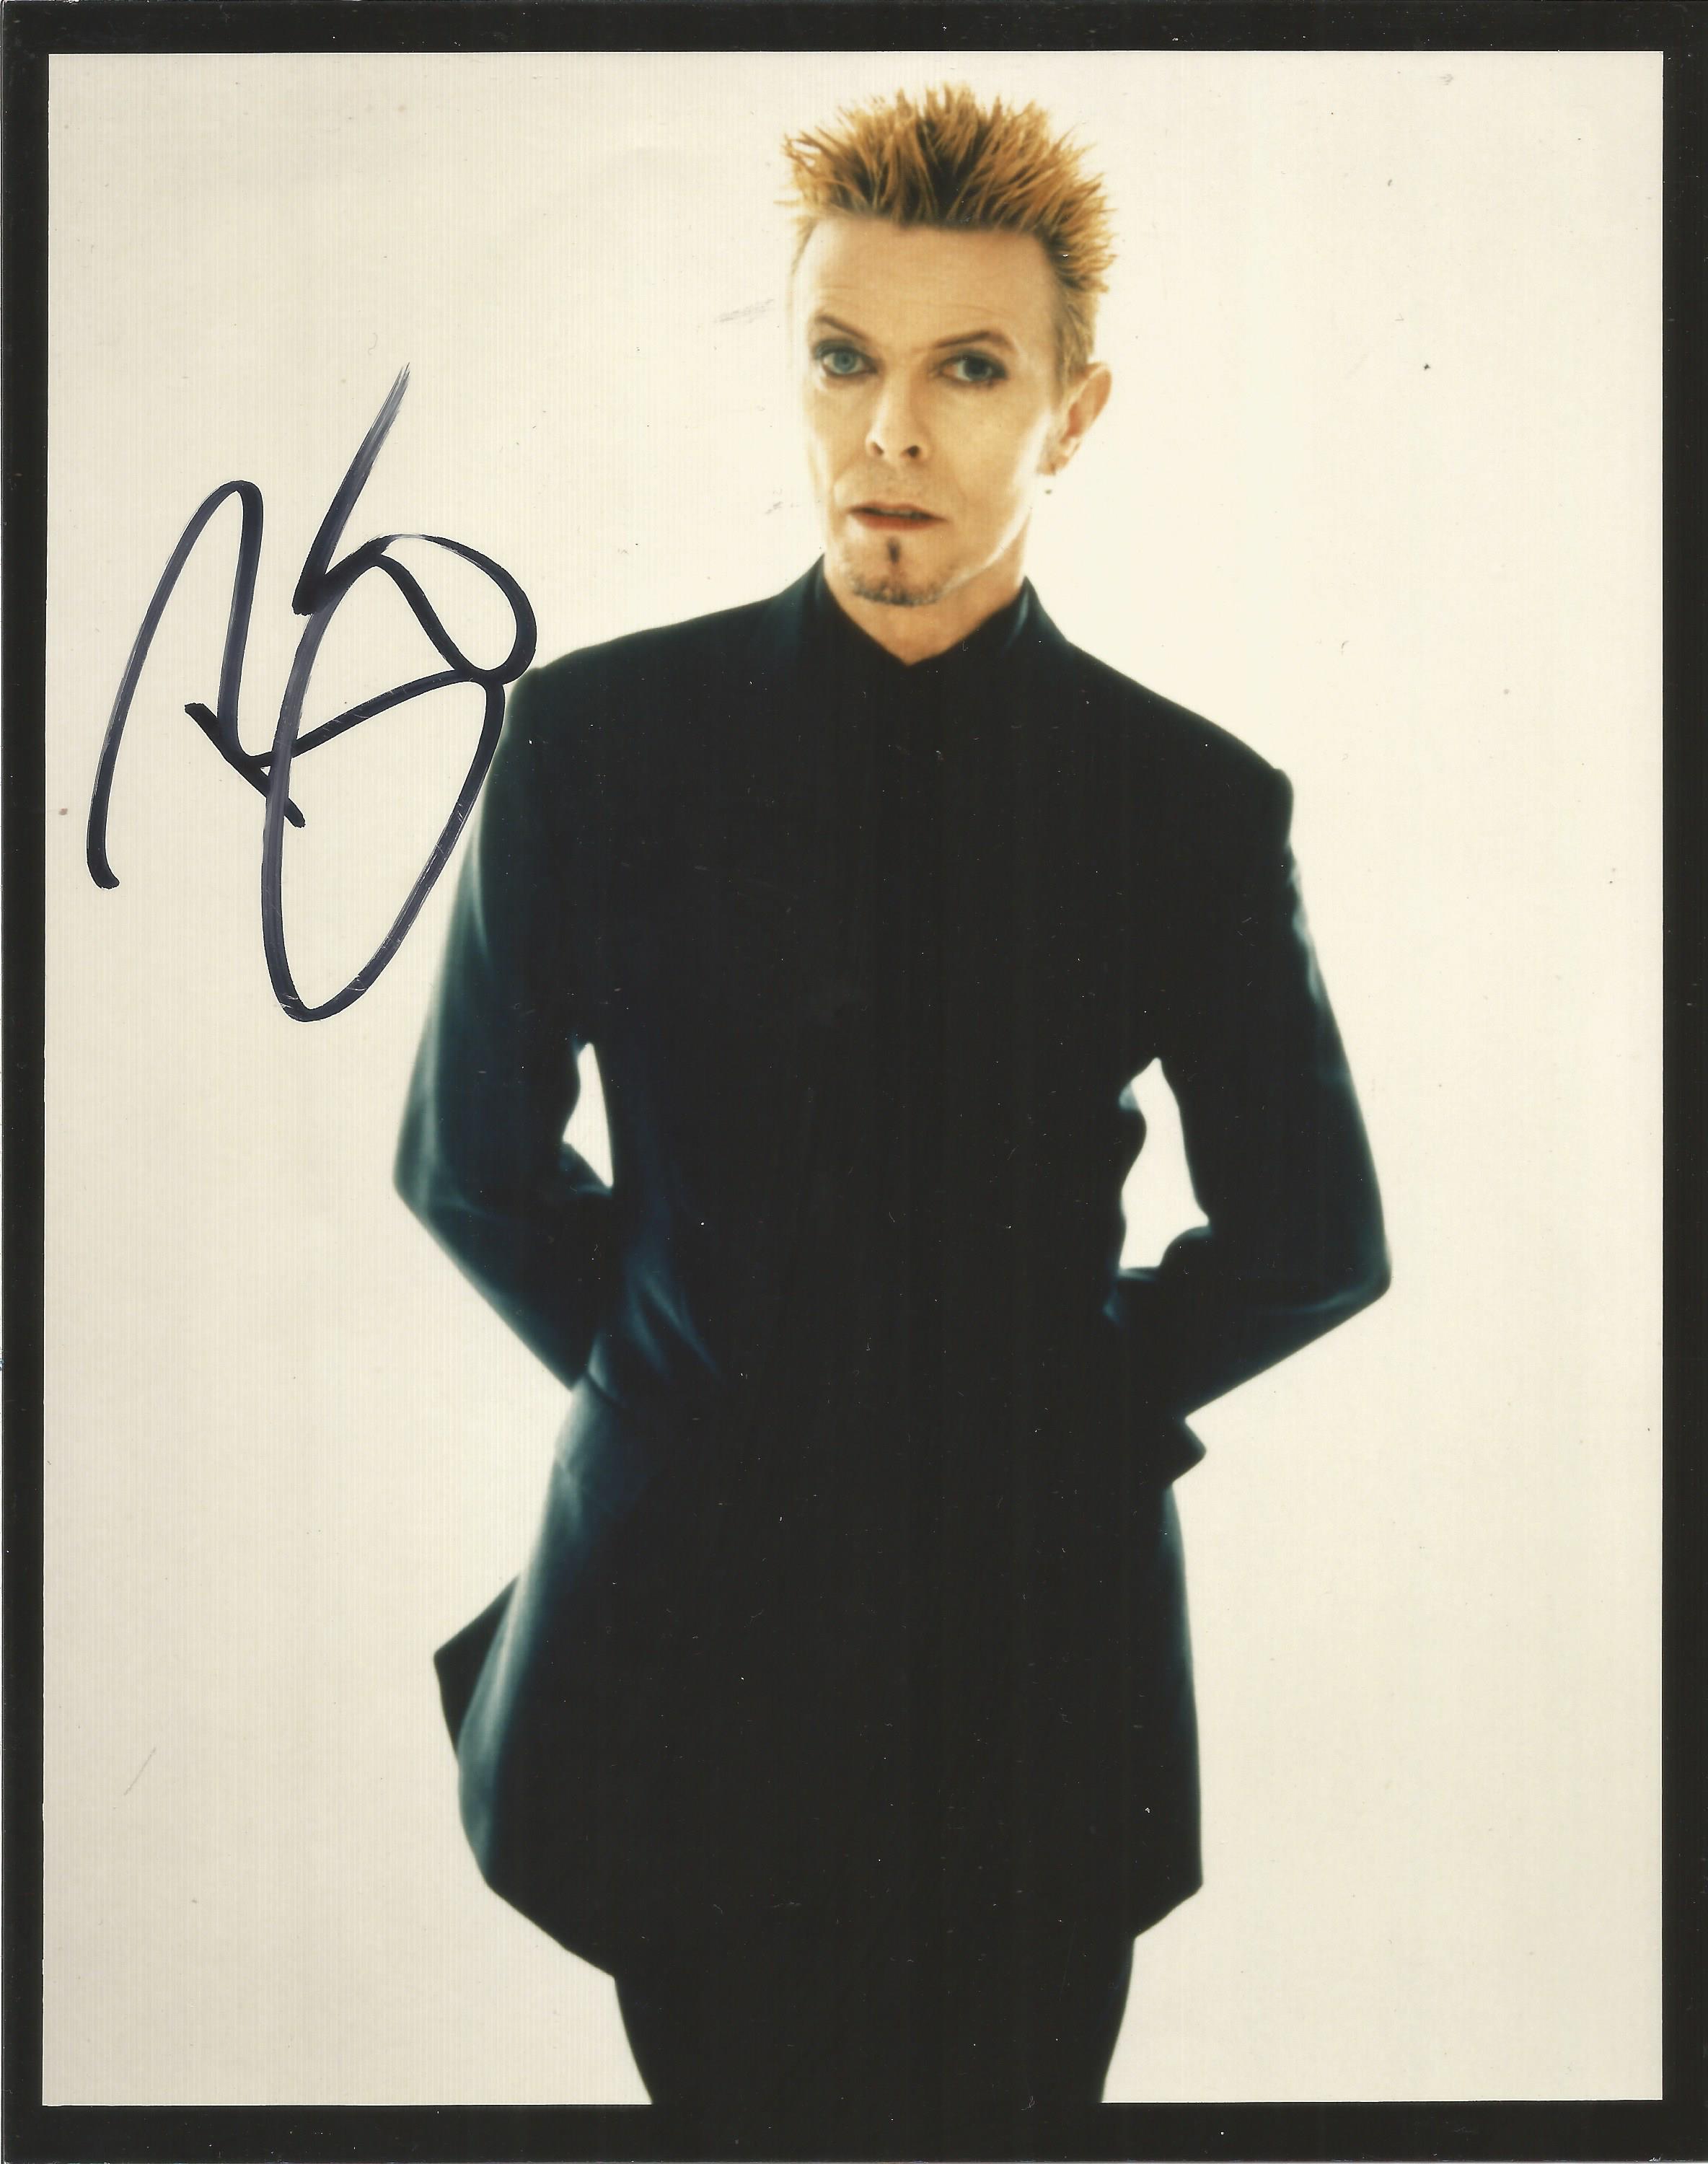 David Bowie signed 10x8 inch colour photo. Good Condition. All autographs come with a Certificate of